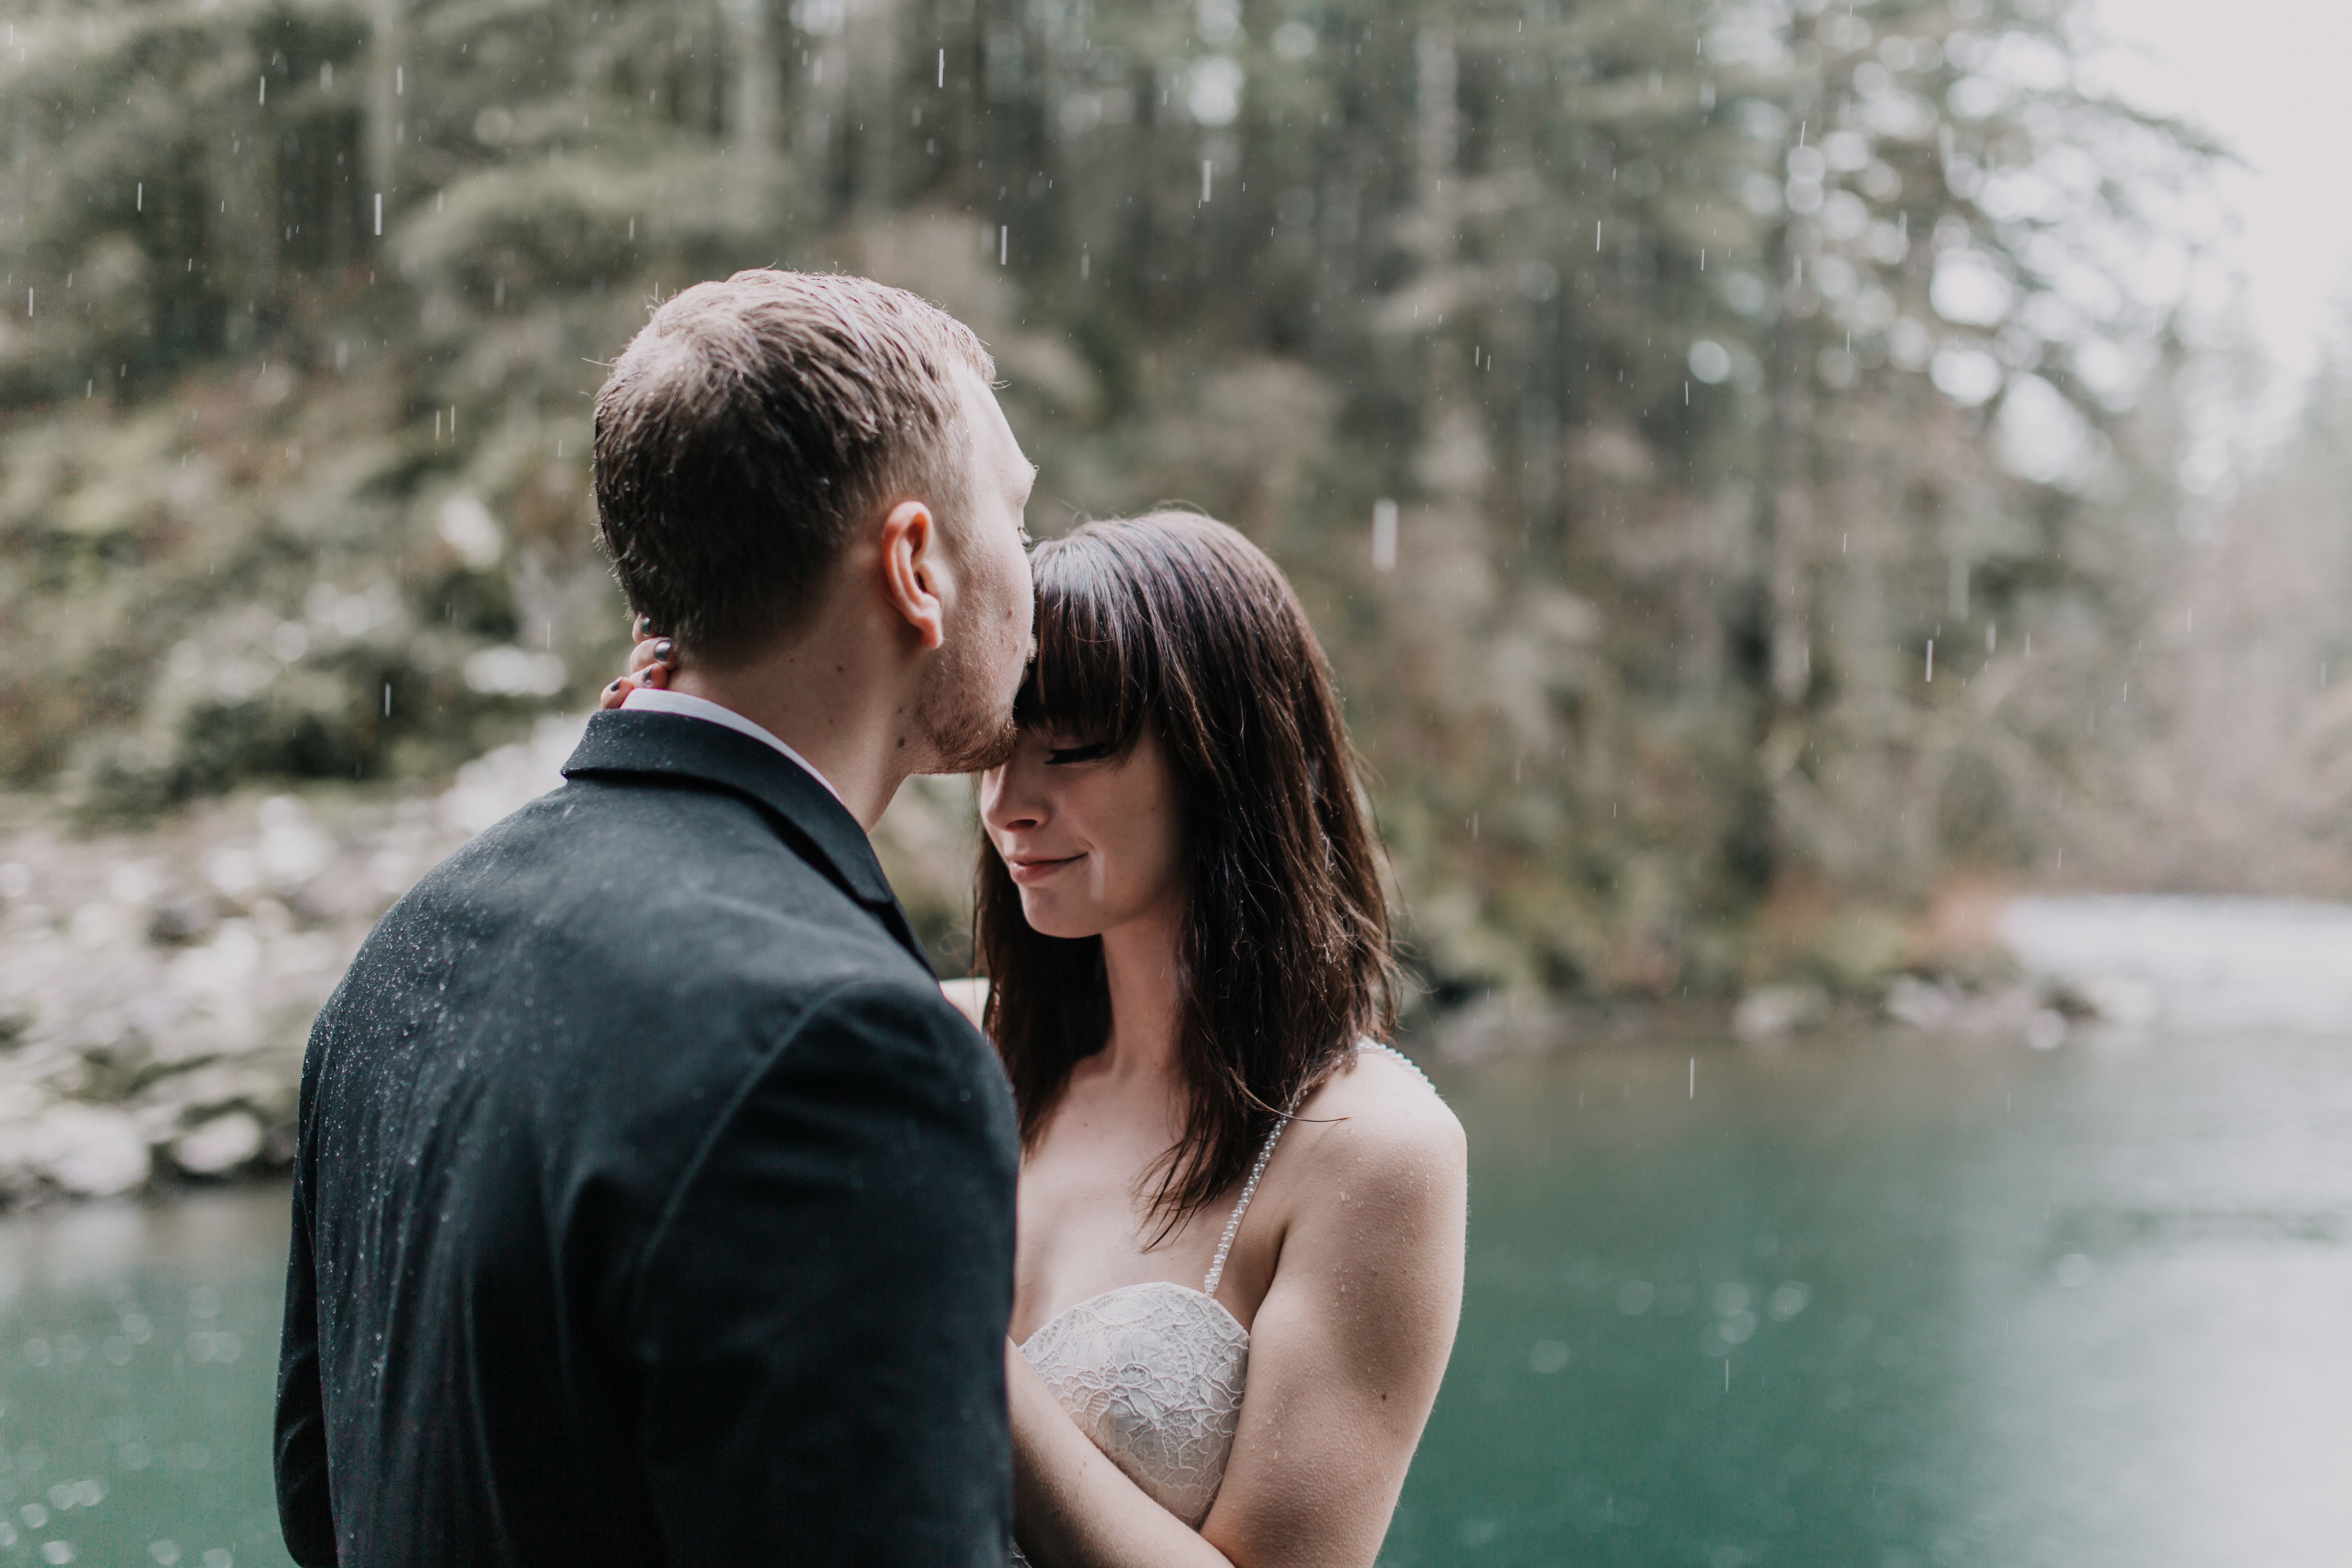 Paige and TJ sharing an intimate wedding moment in the rain at Moulton Falls for their adventure wedding in Washington.